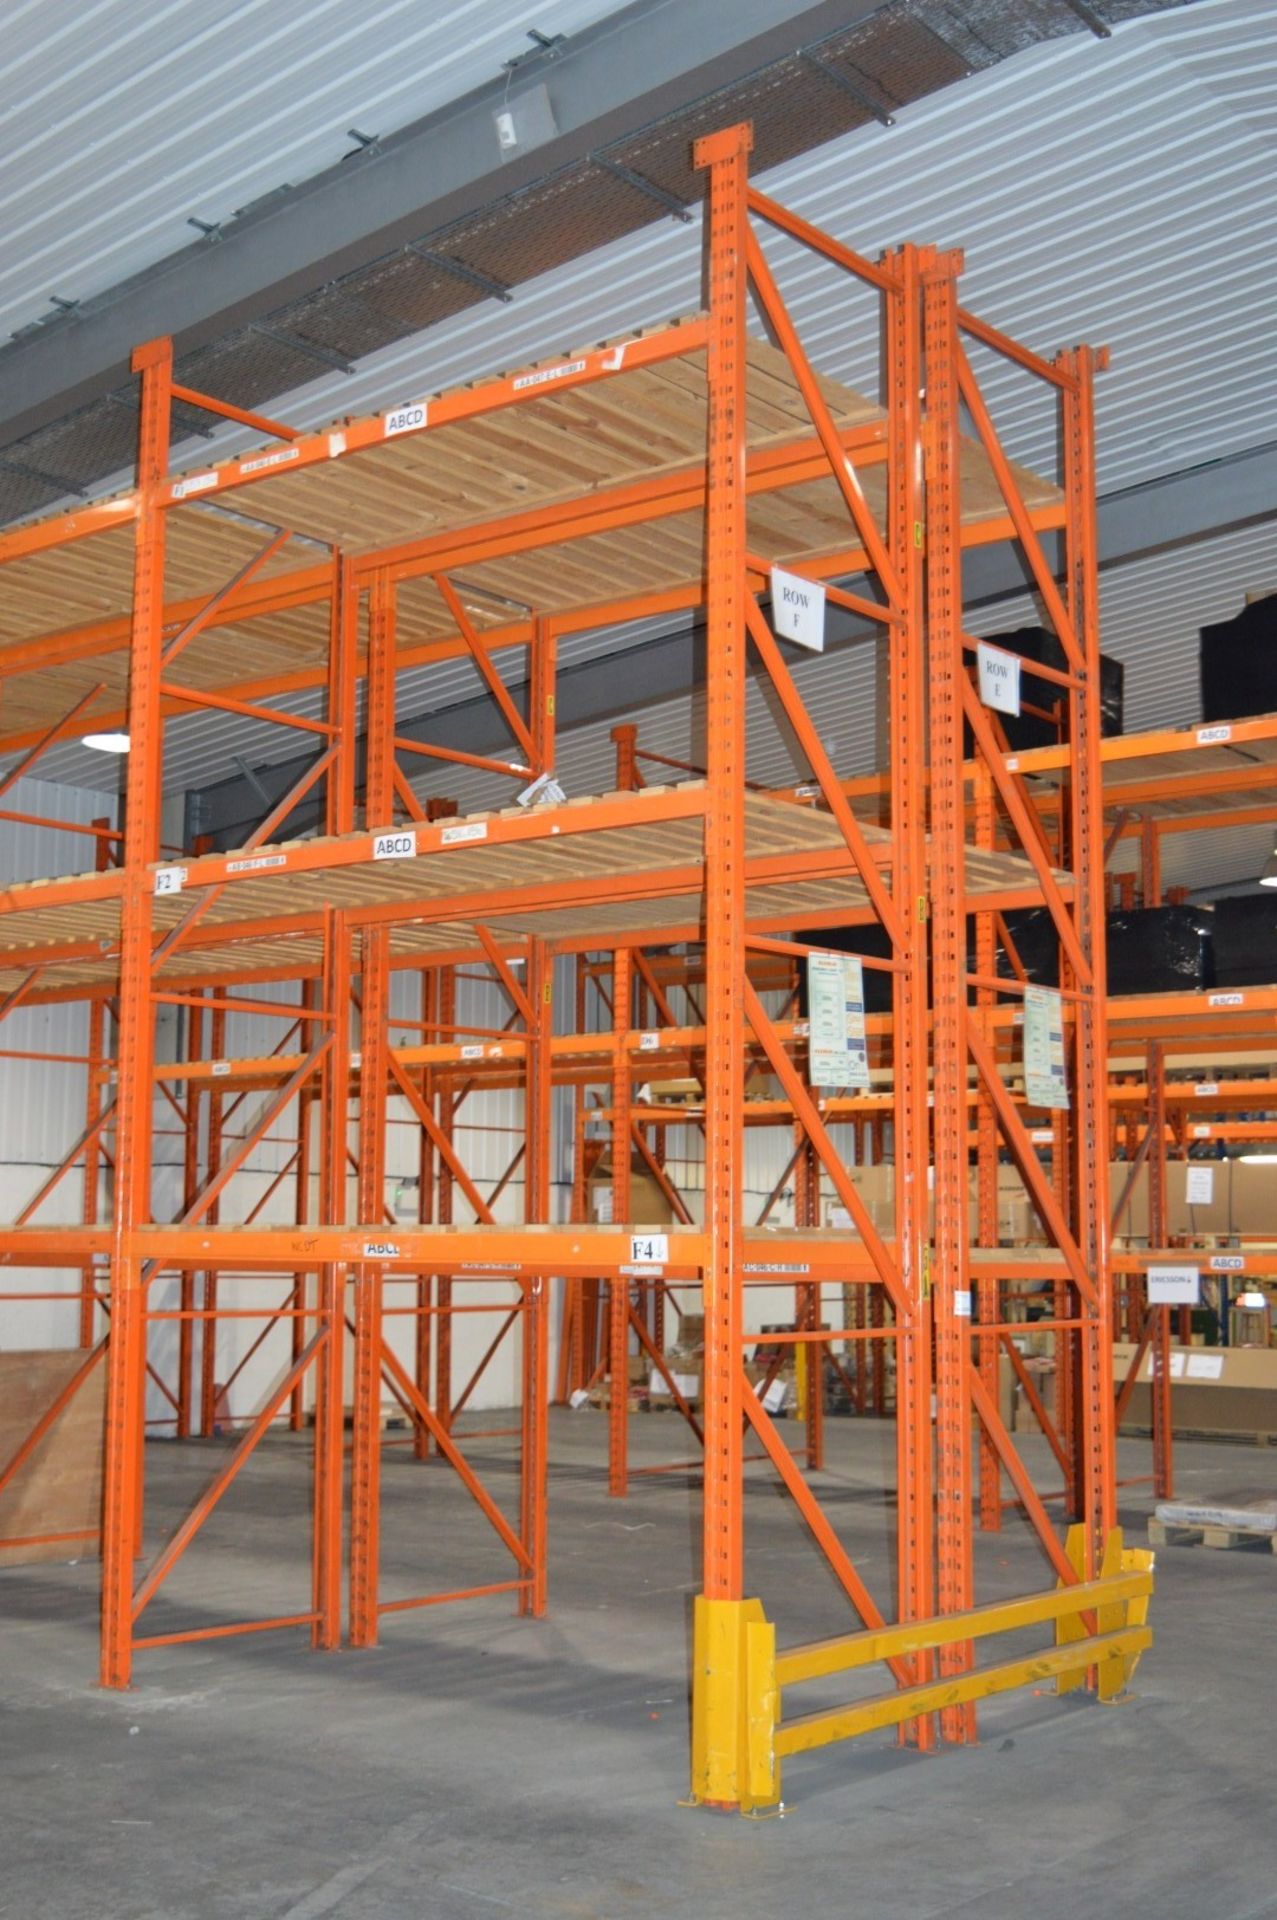 8 x Bays of Warehouse PALLET RACKING - Lot Includes 110 x Uprights, 56 x Crossbeams, 1 x - Image 2 of 9